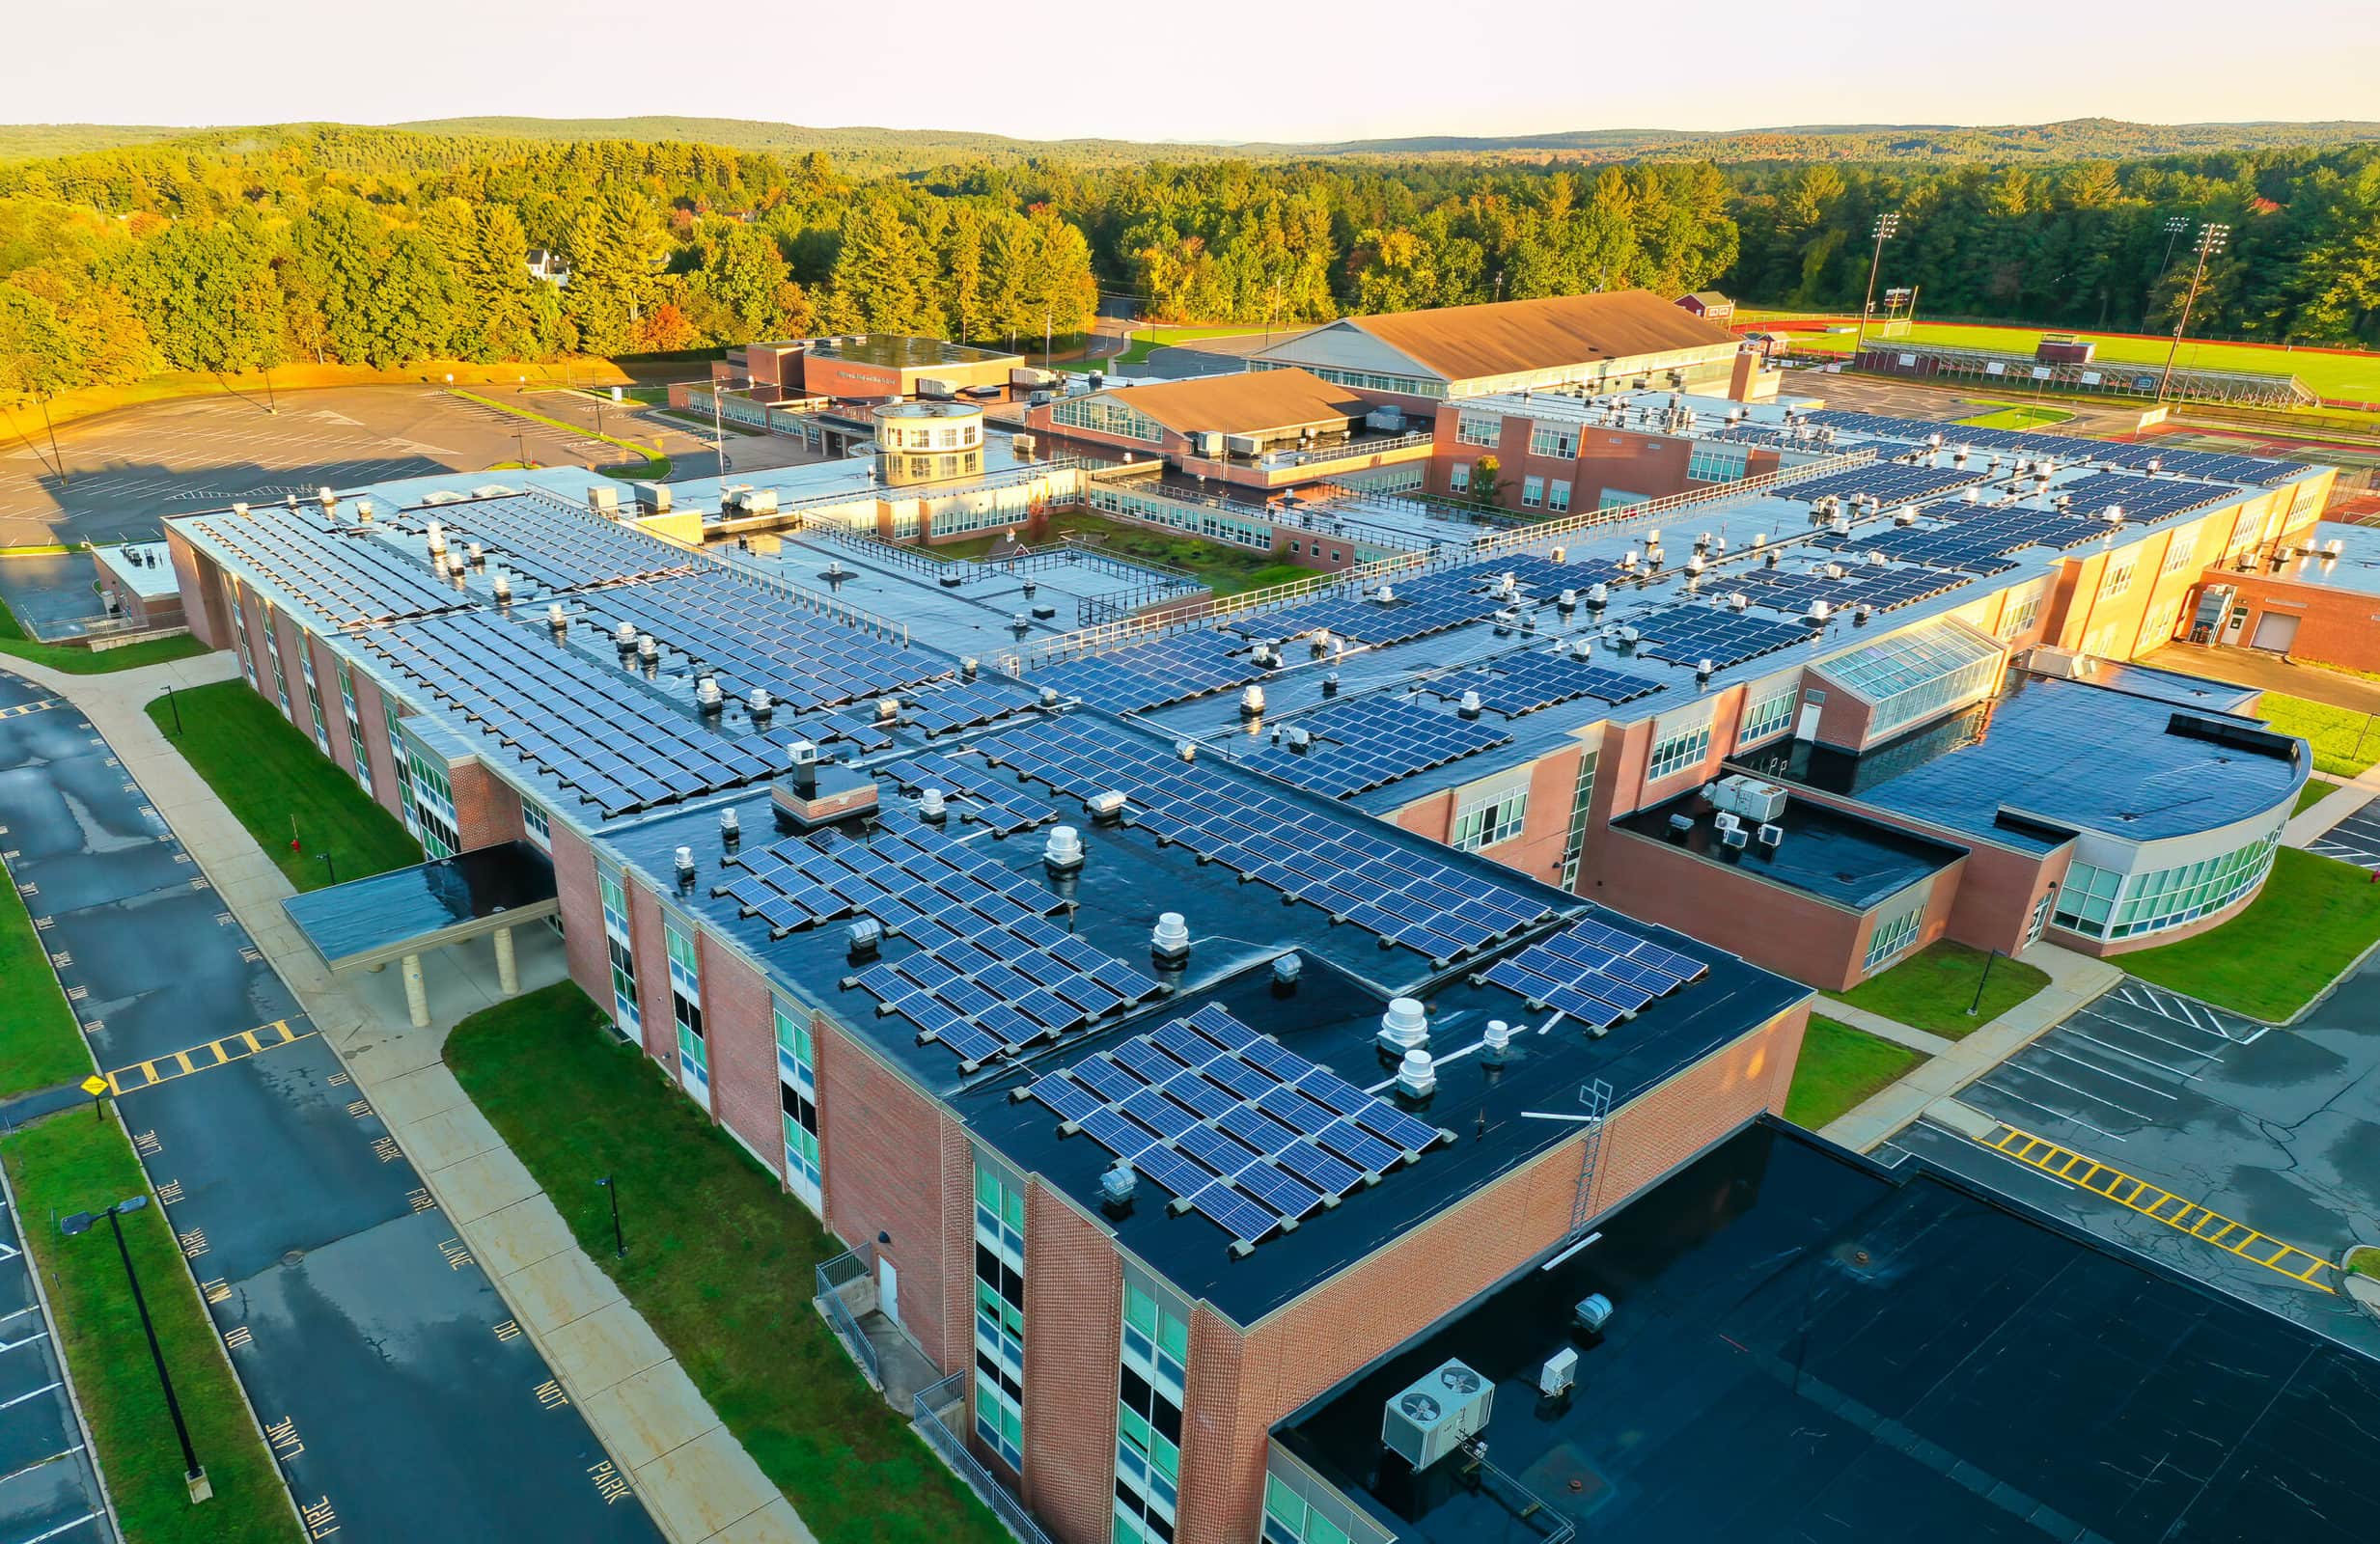 drone photo of Algonquin Regional High School in Northborough by Tami White